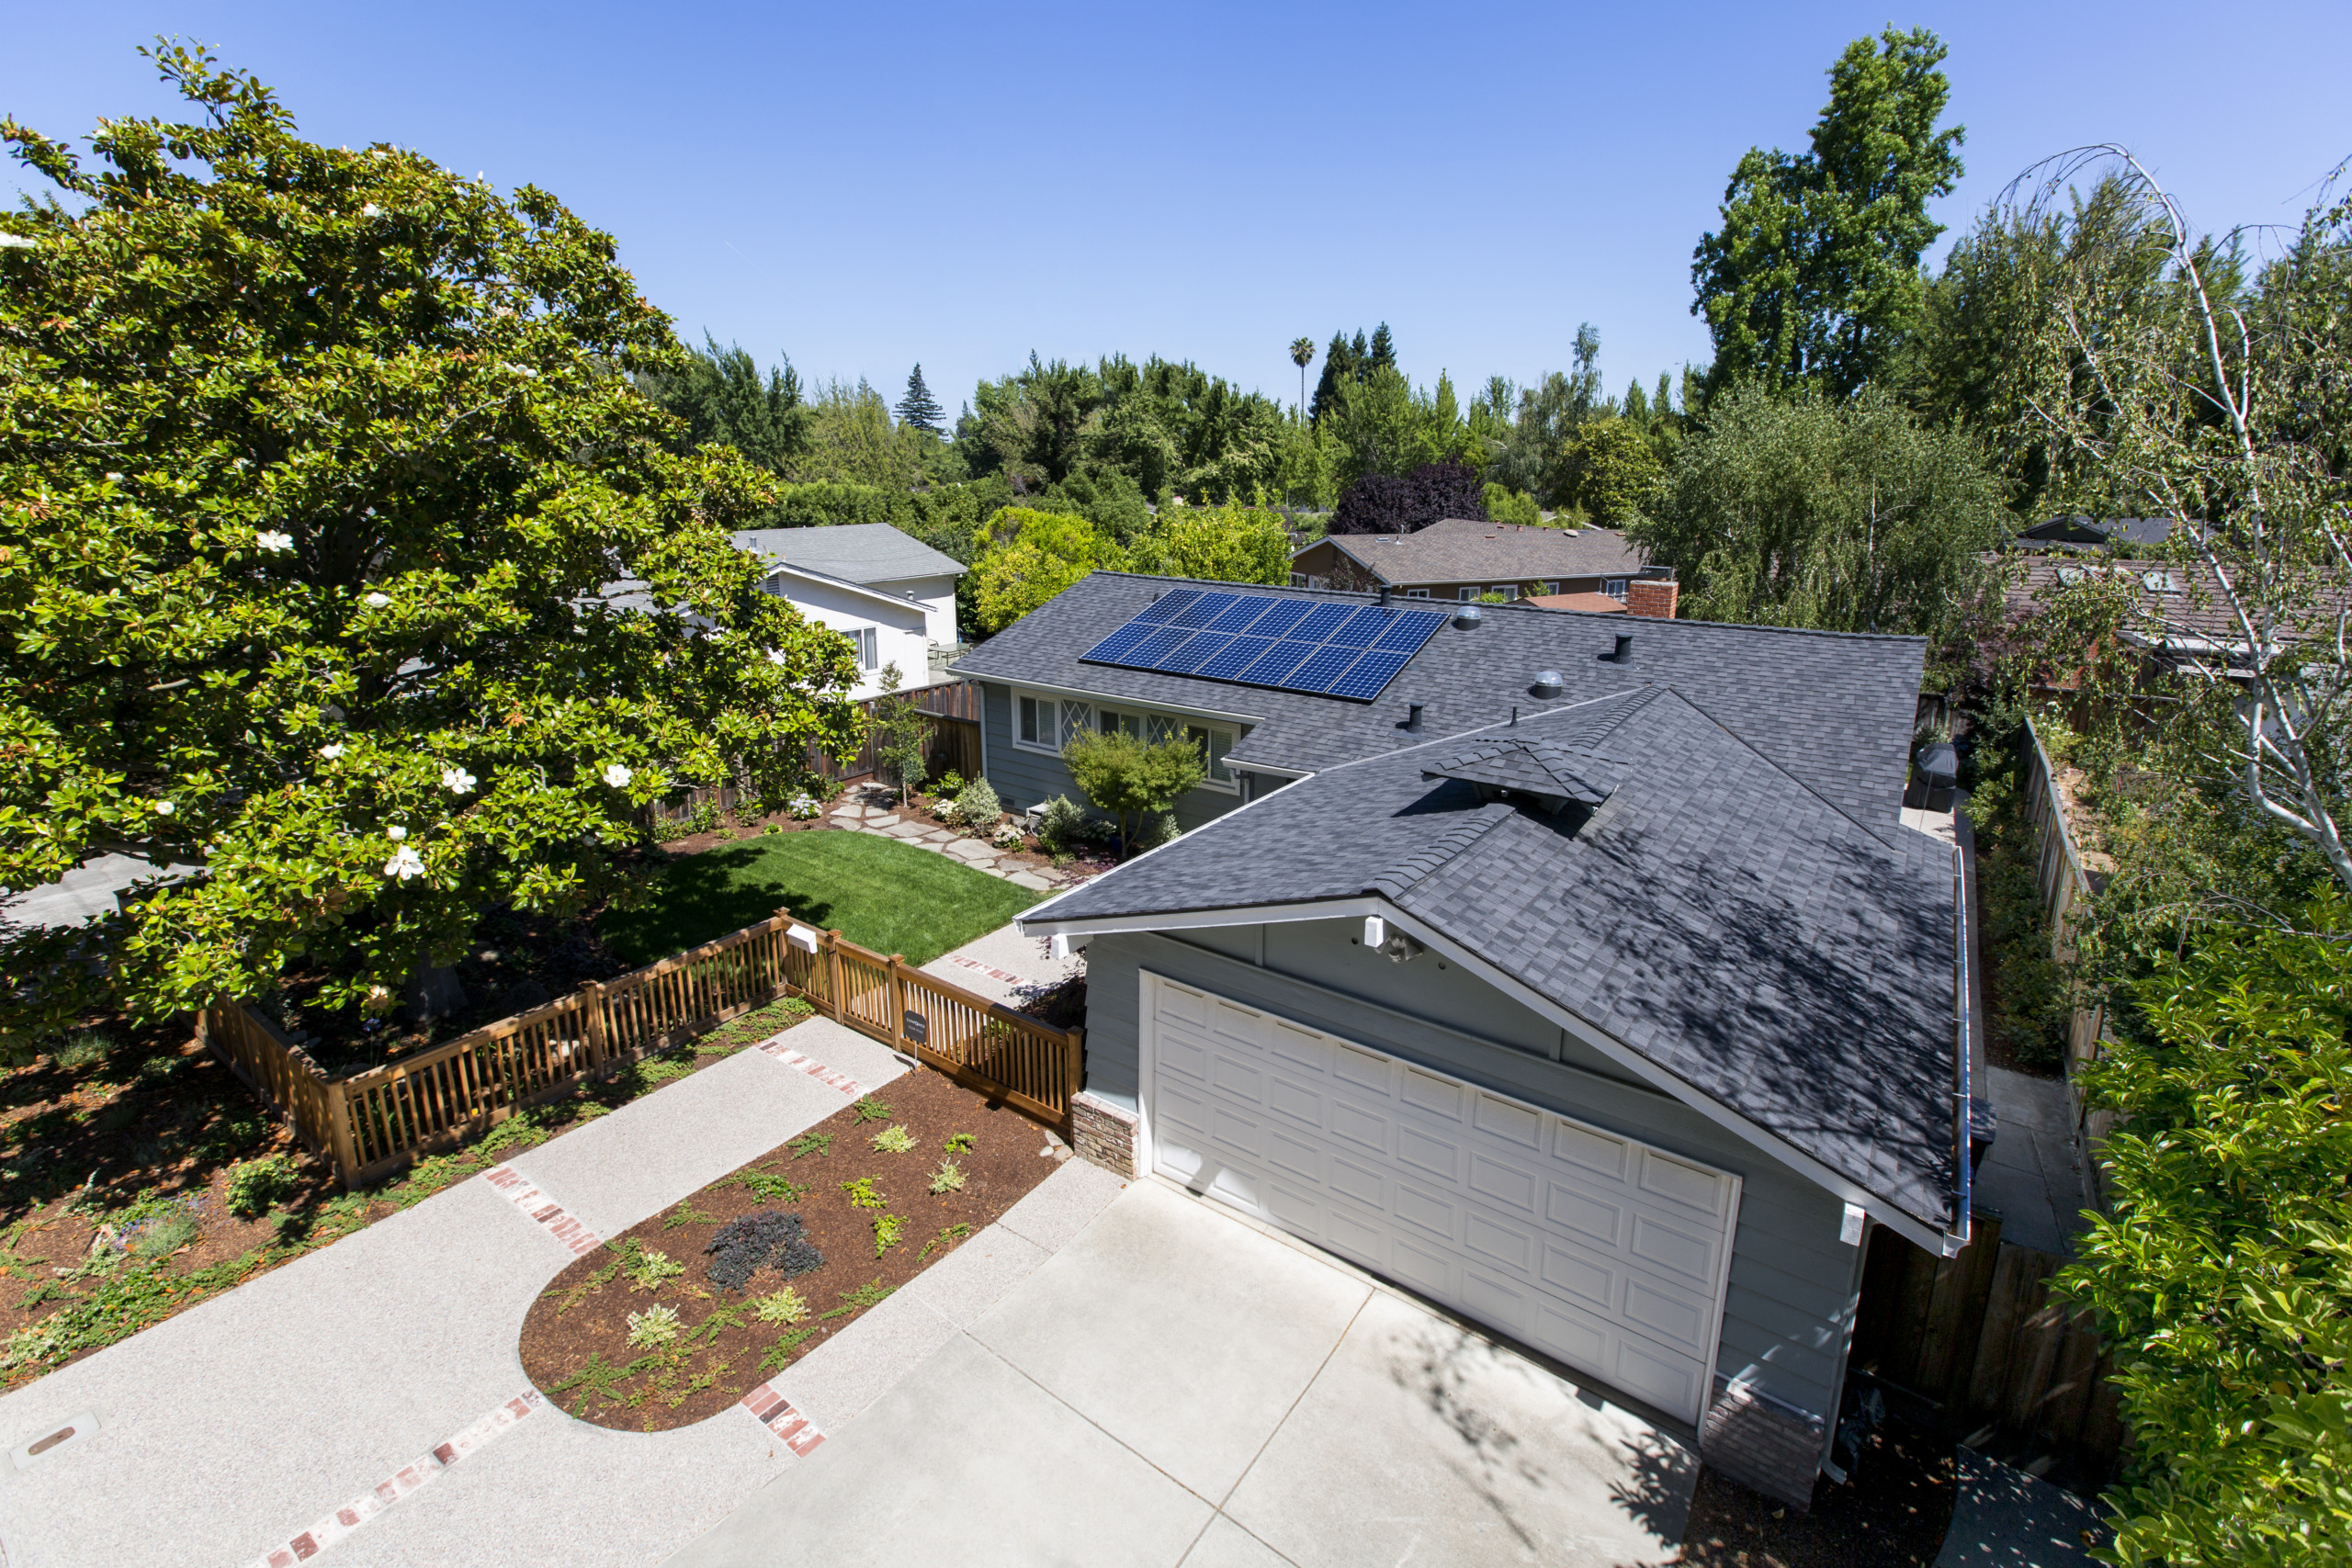 Residential solar installation in Mountain View, CA